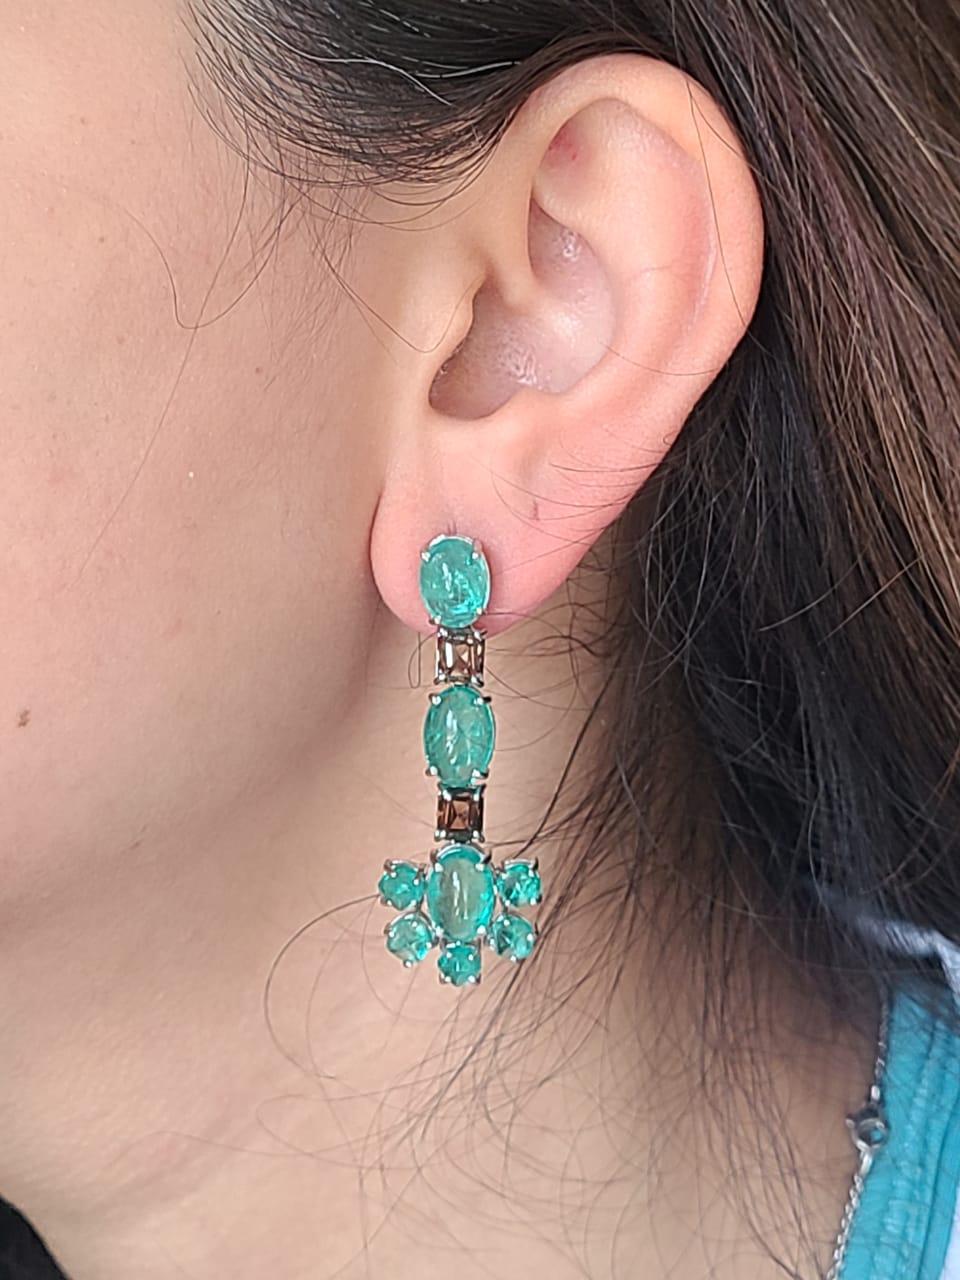 A very beautiful and one of a kind, Emerald Chandelier Earrings set in 18K White Gold & Diamonds. The weight of the Columbian Emerald Cabochons is 15.78 carats. The Emeralds are completely natural, without any treatment and are of Columbian origin.